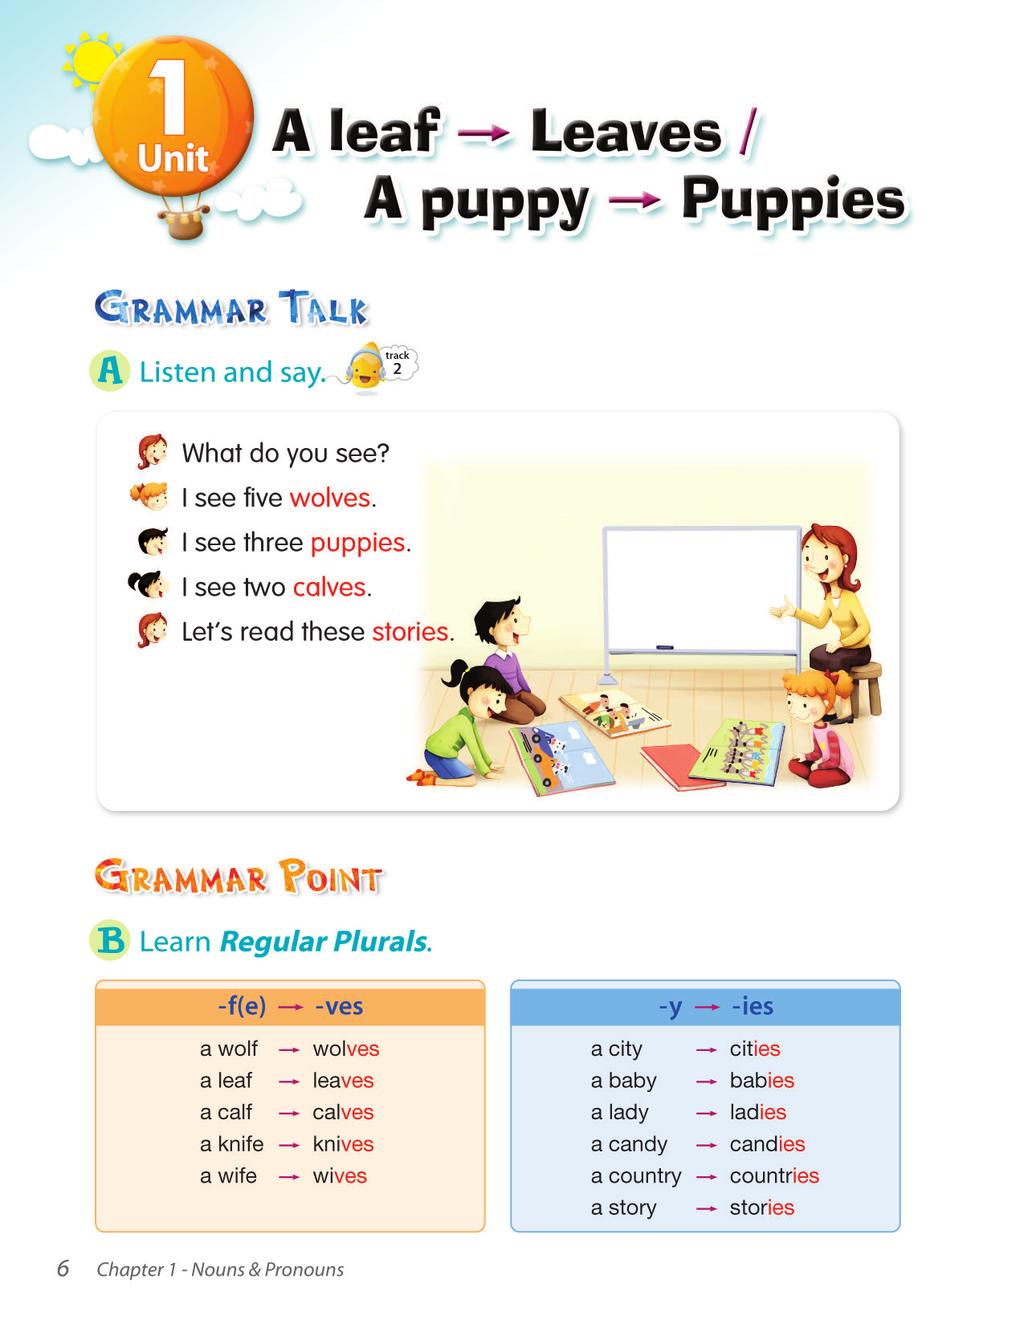 With this grammar book series, the learners will definitely have the chance to improve and develop their English grammar skills and ability. Each unit is composed of 4 pages.